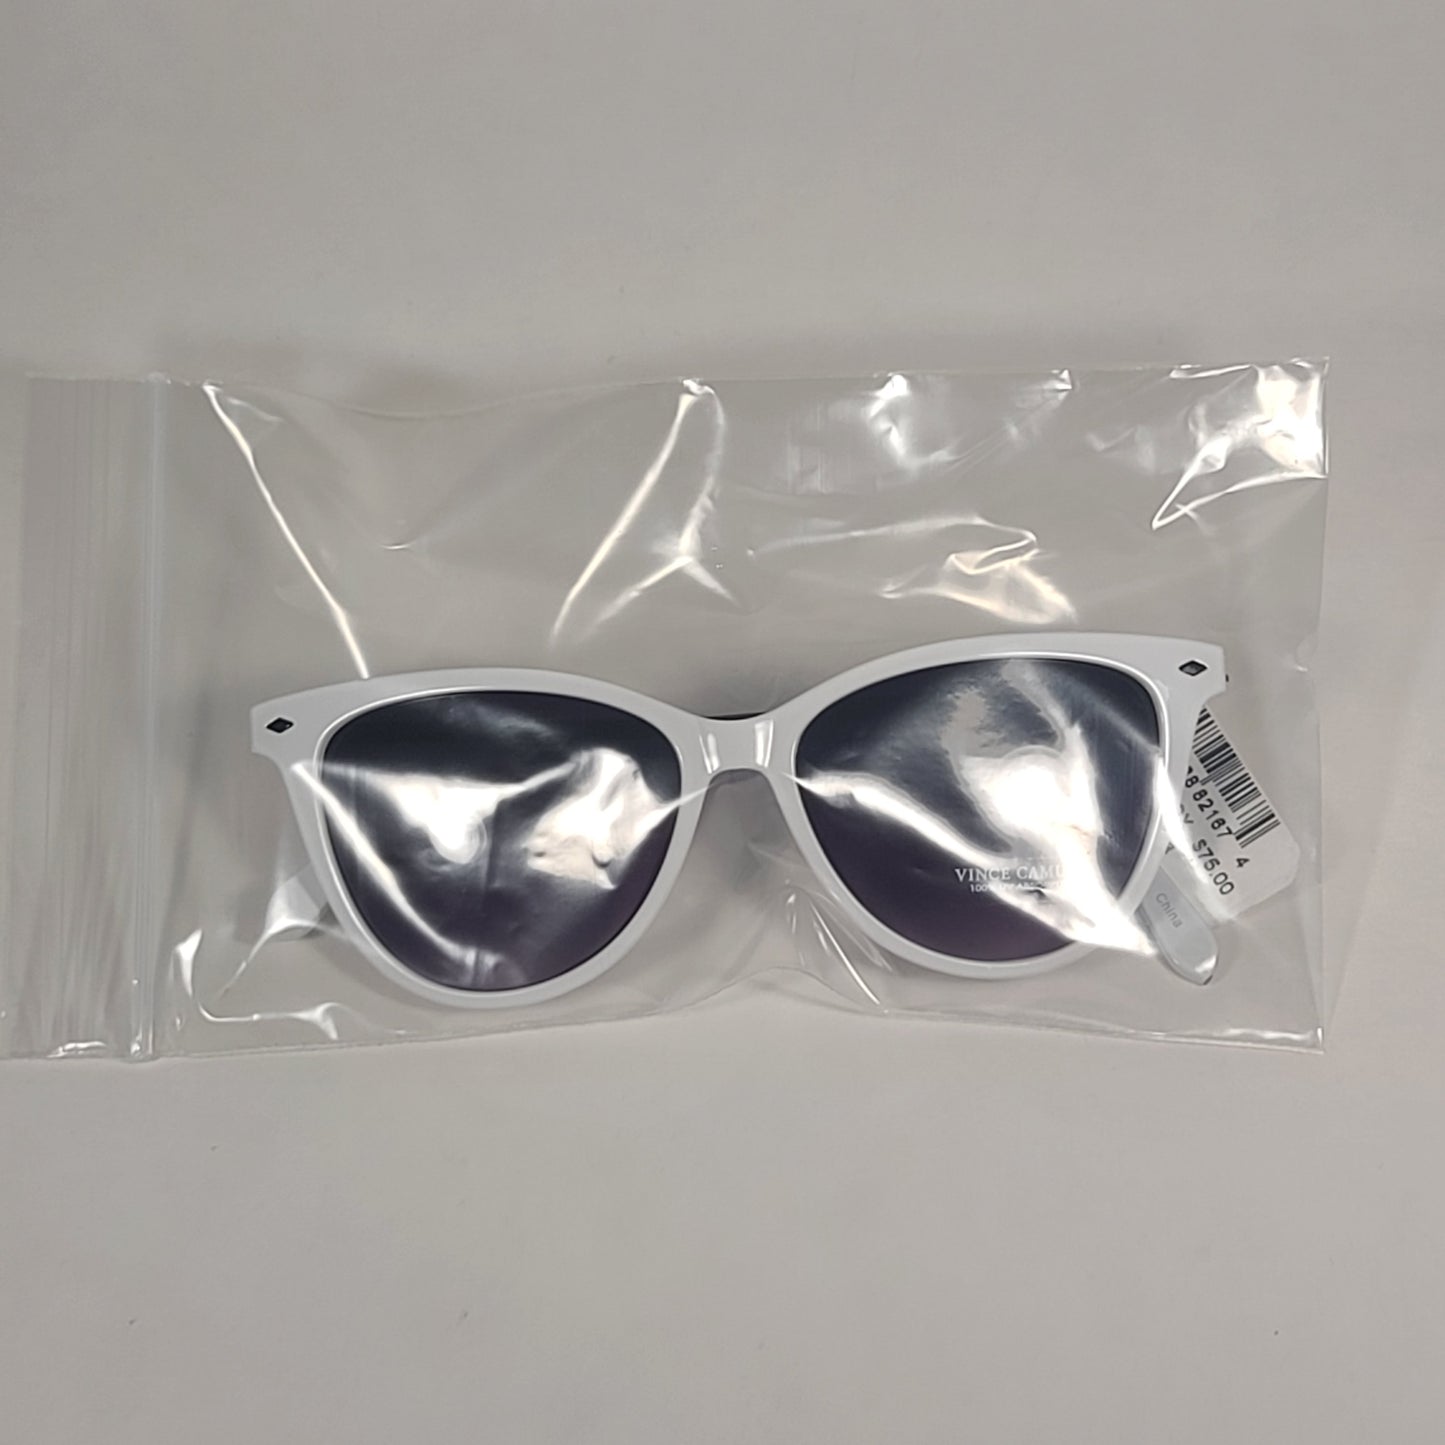 Vince Camuto Cat Eye Sunglasses White And Black Frame Smoke Gradient Lens VC961 WHOX - Sunglasses